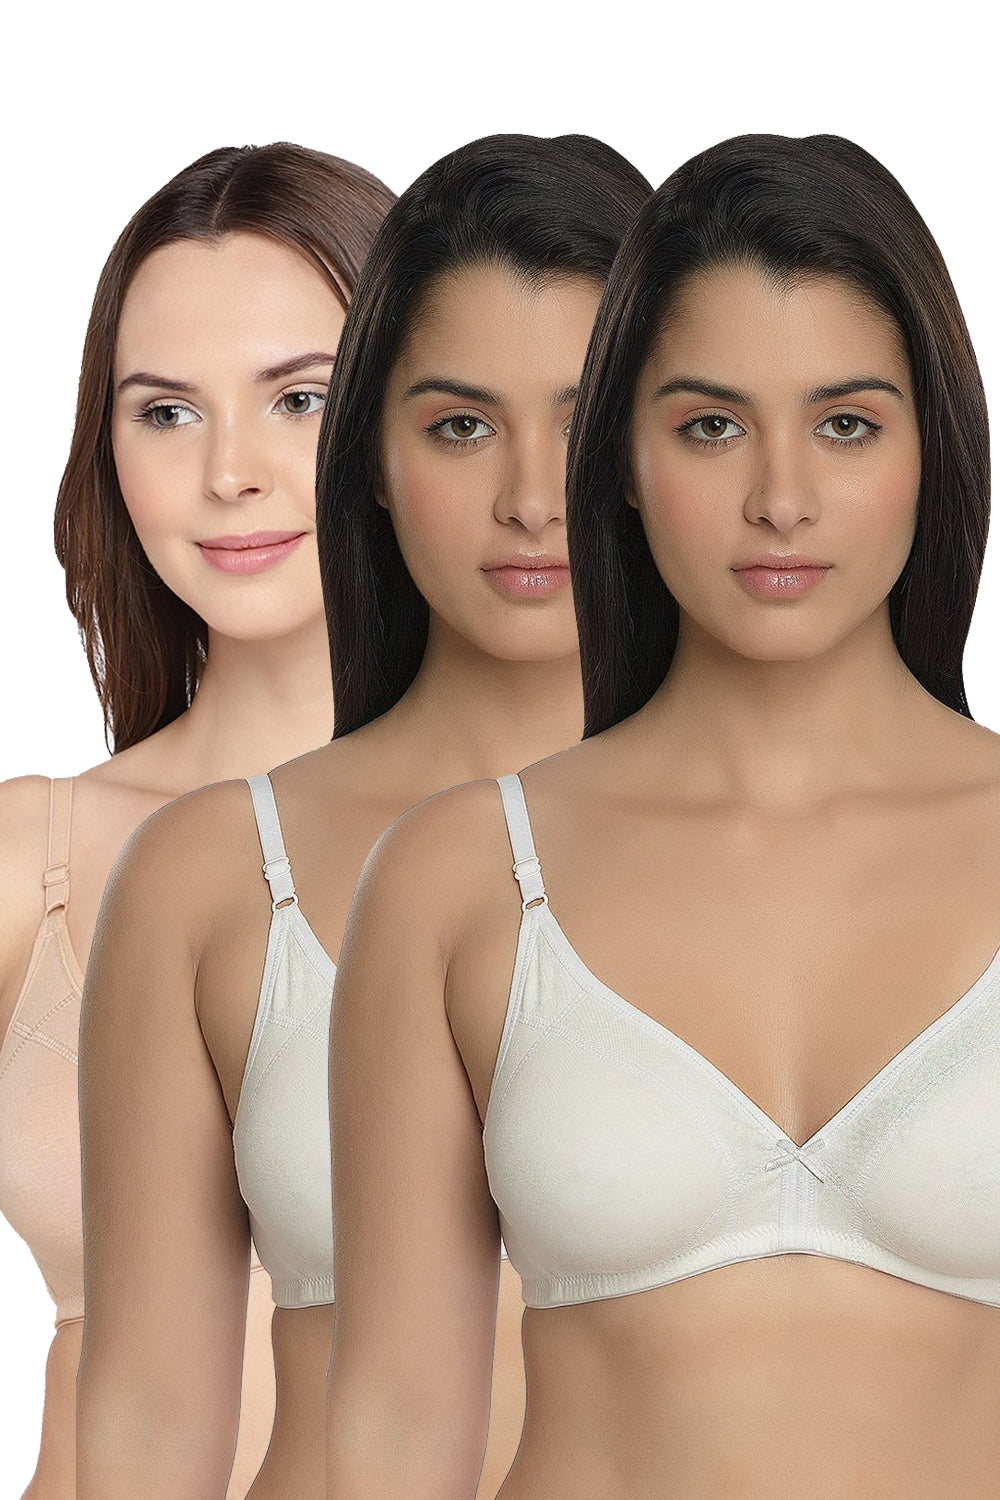 Buy Inner Sense Organic Cotton Antimicrobial Seamless Bra with Supportive  Stitch - White Online